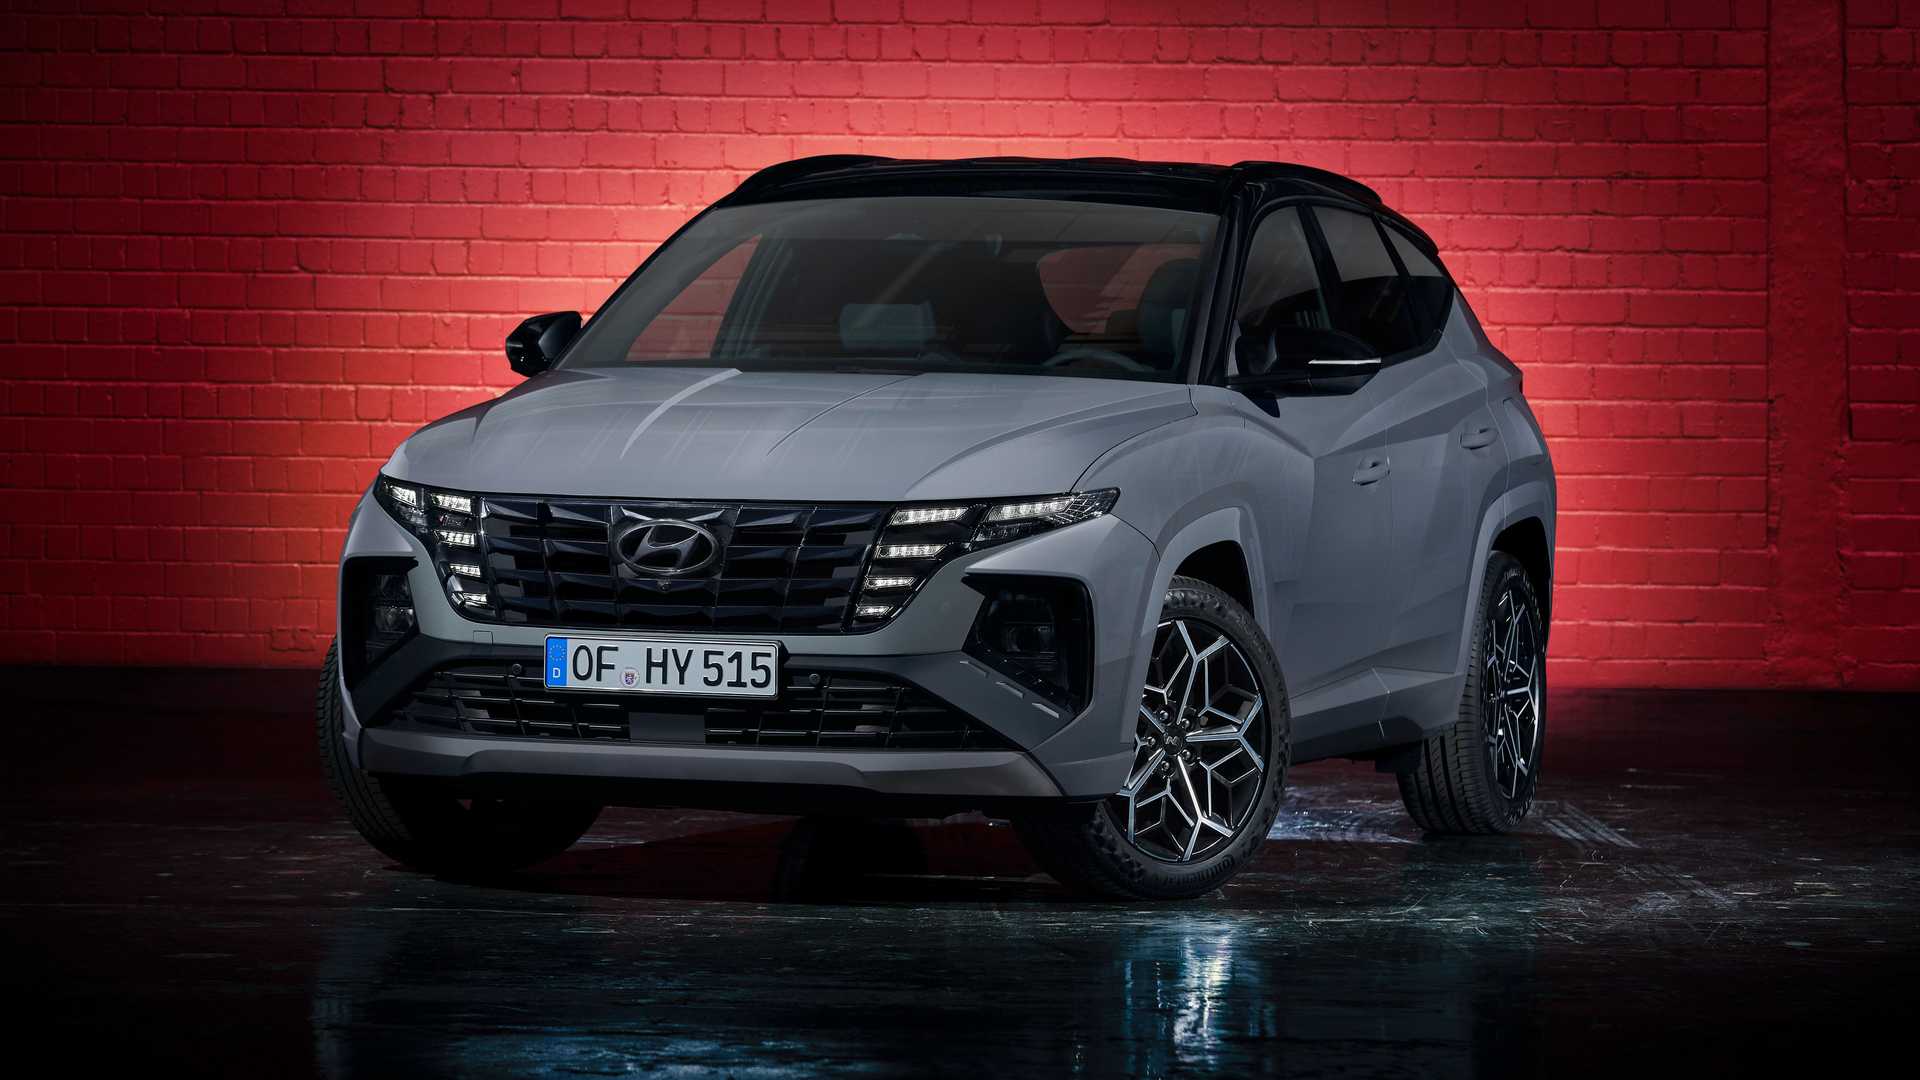 2021 Hyundai Tucson N Line Revealed With Some Major Changes